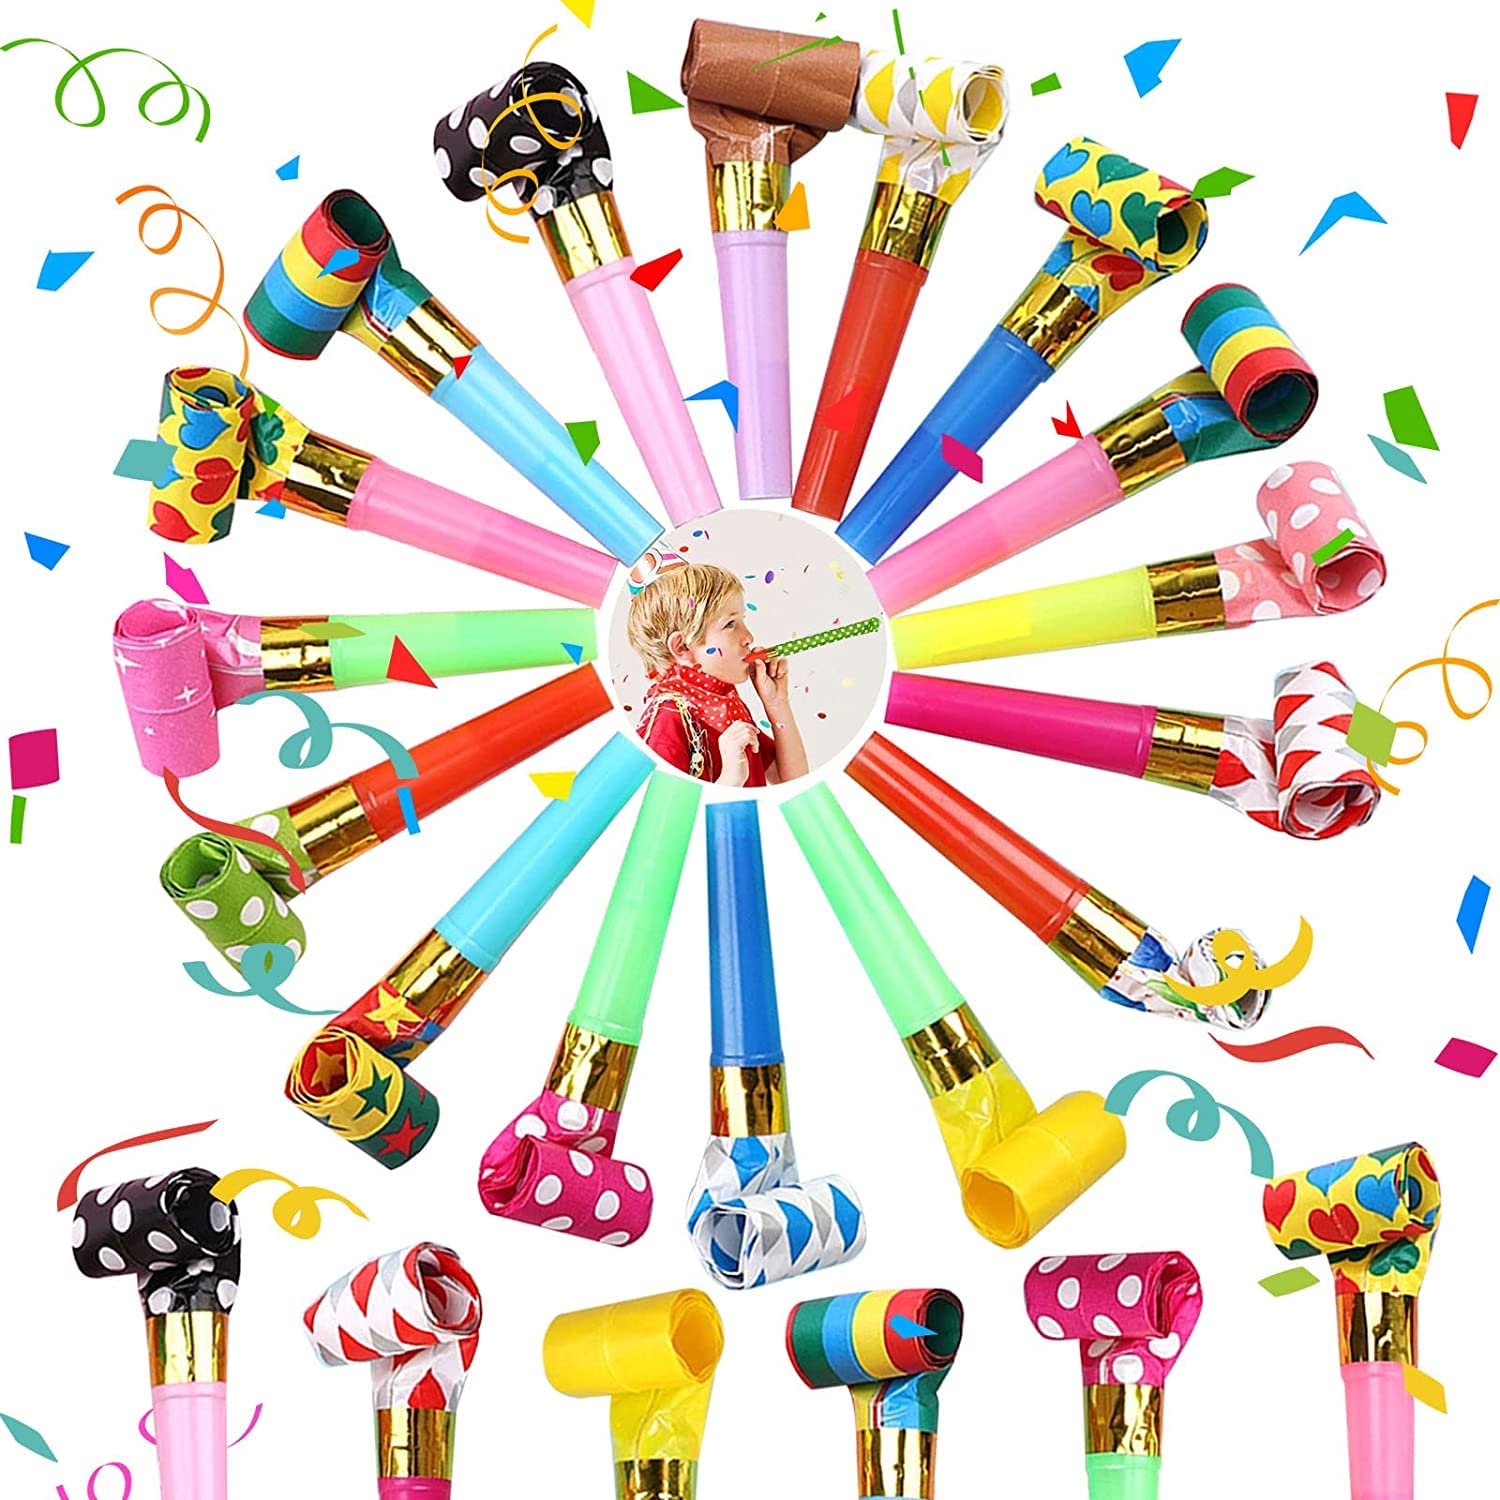 25 Pieces Party Blower,Colourful Noisemakers Party Blowouts Whistles Party Squawkers Fringed Noise Maker,Birthday Noisemakers Birthday Blow Horns Party Horns Party Whistles New Years Party Noisemakers